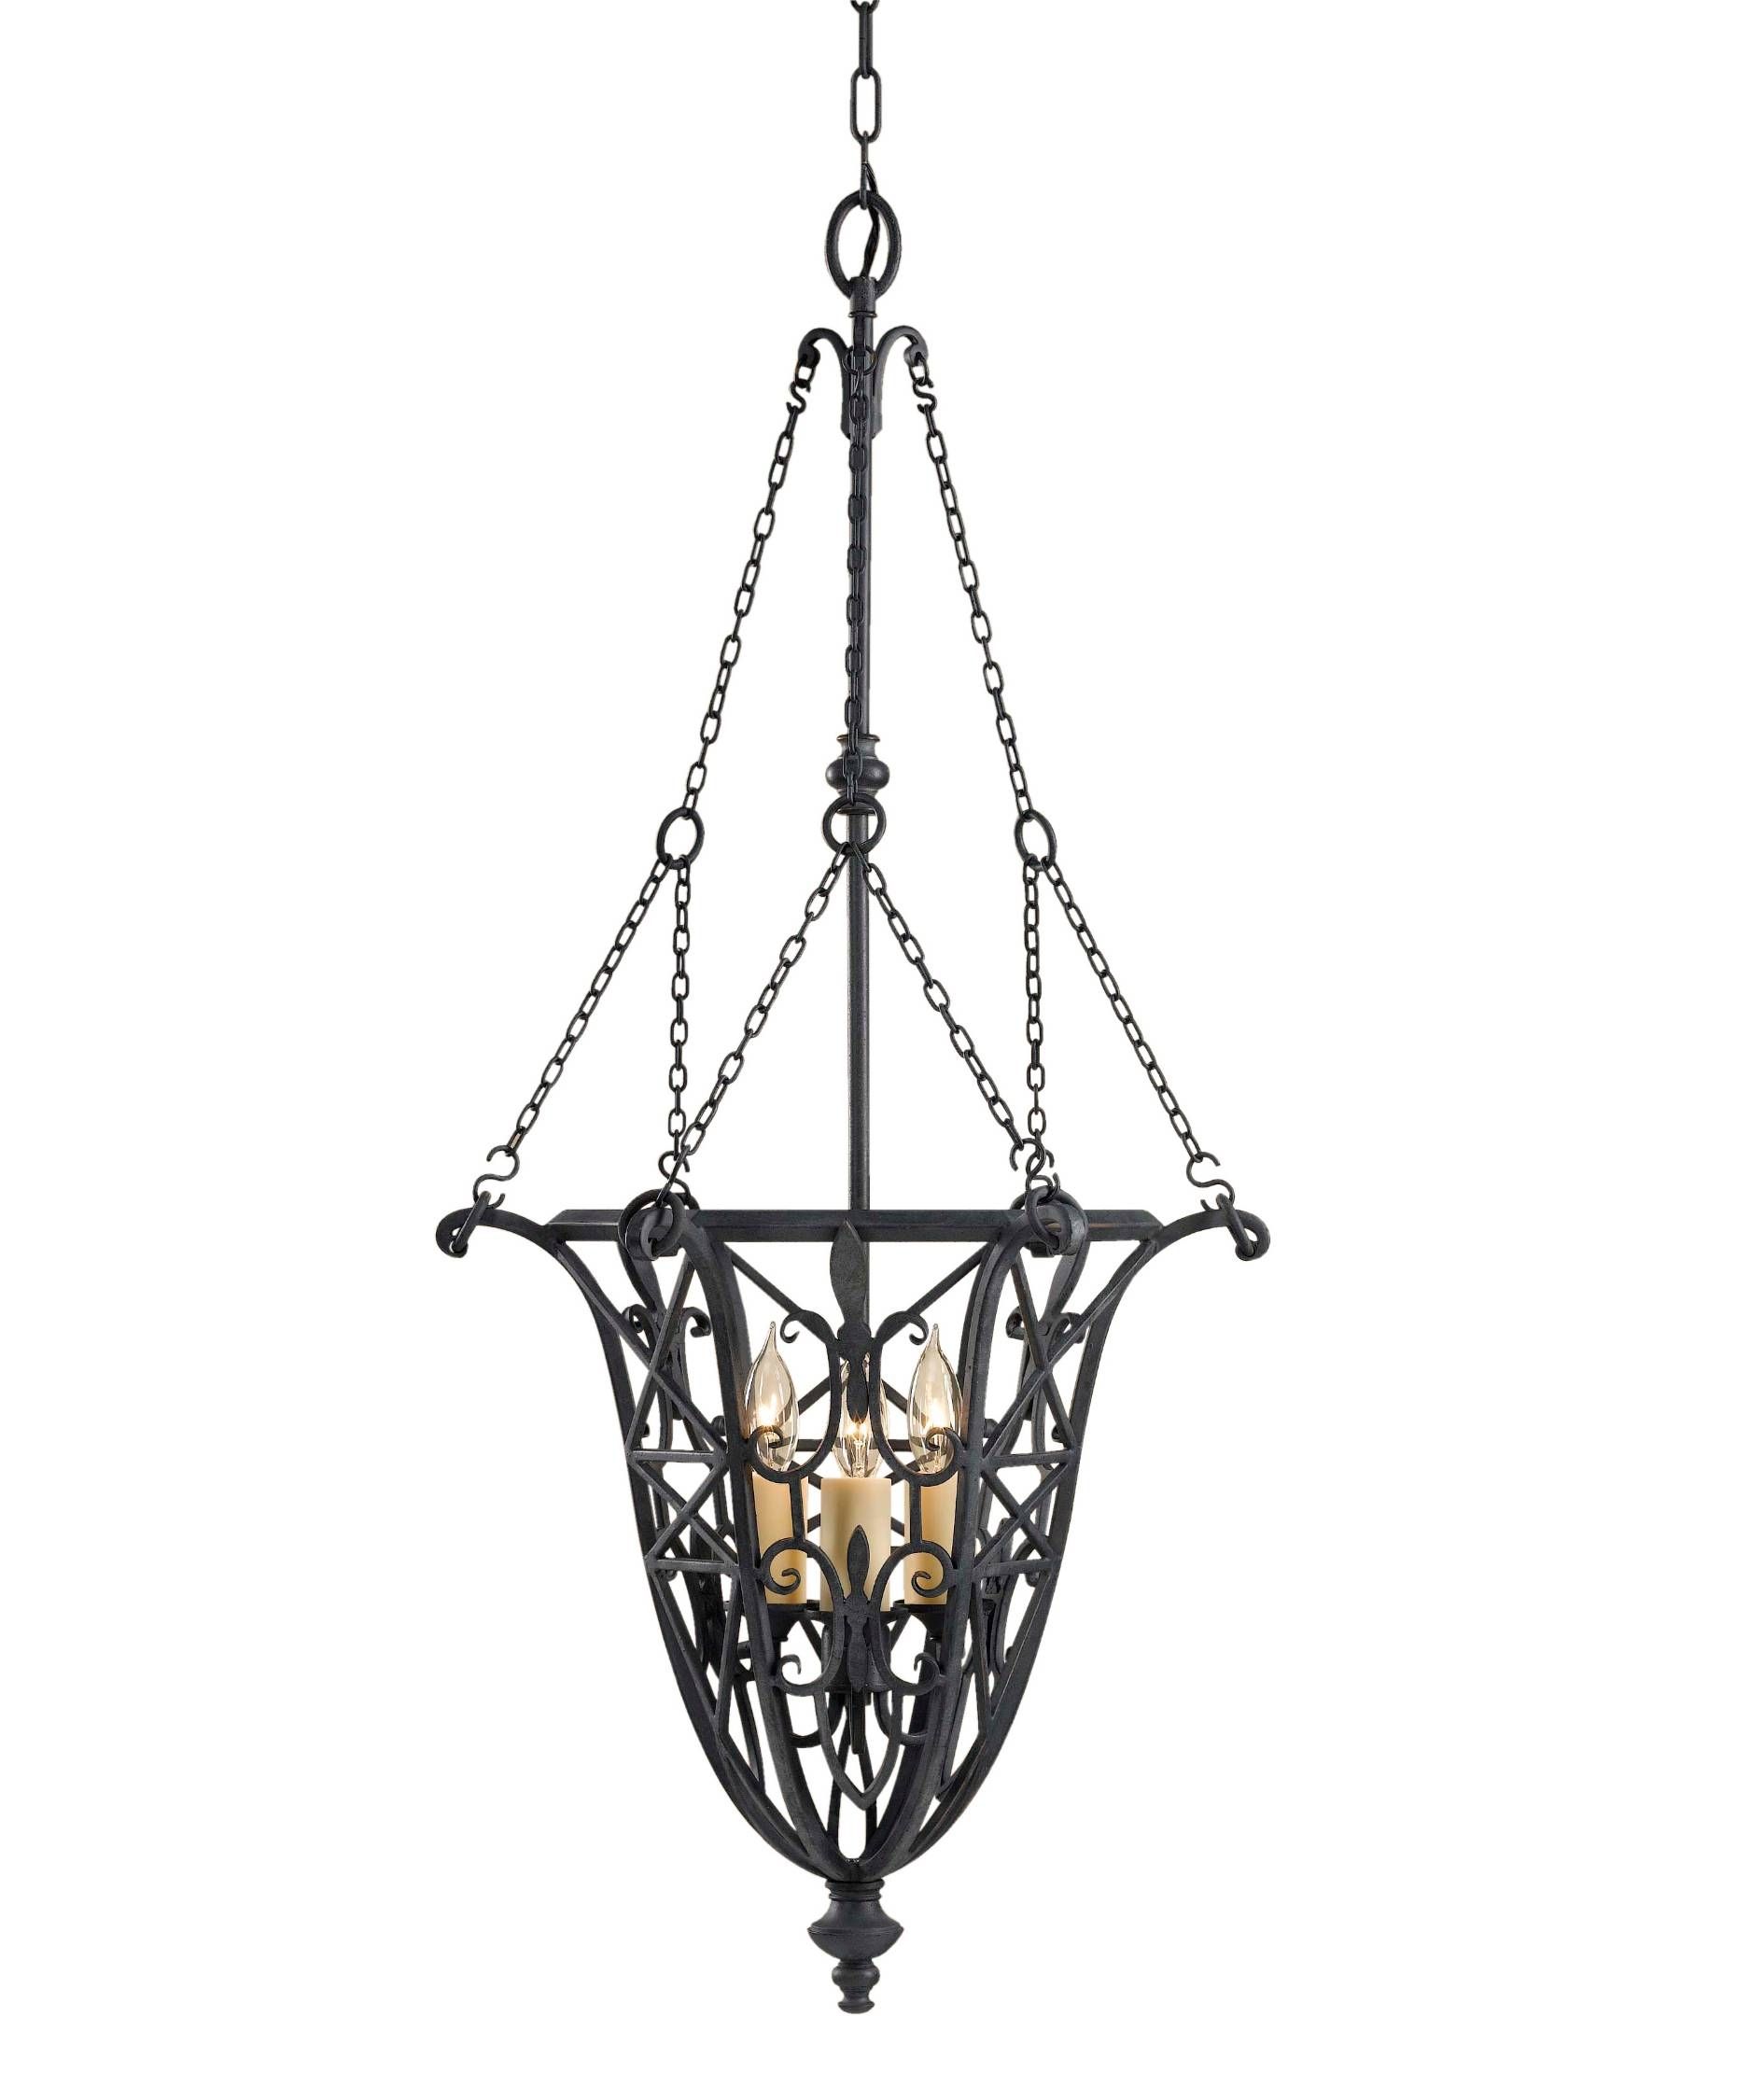 Wrought Iron Mini Pendant Lights Including Lighting Bronze Nickel Throughout Wrought Iron Mini Pendant Lights (View 9 of 15)